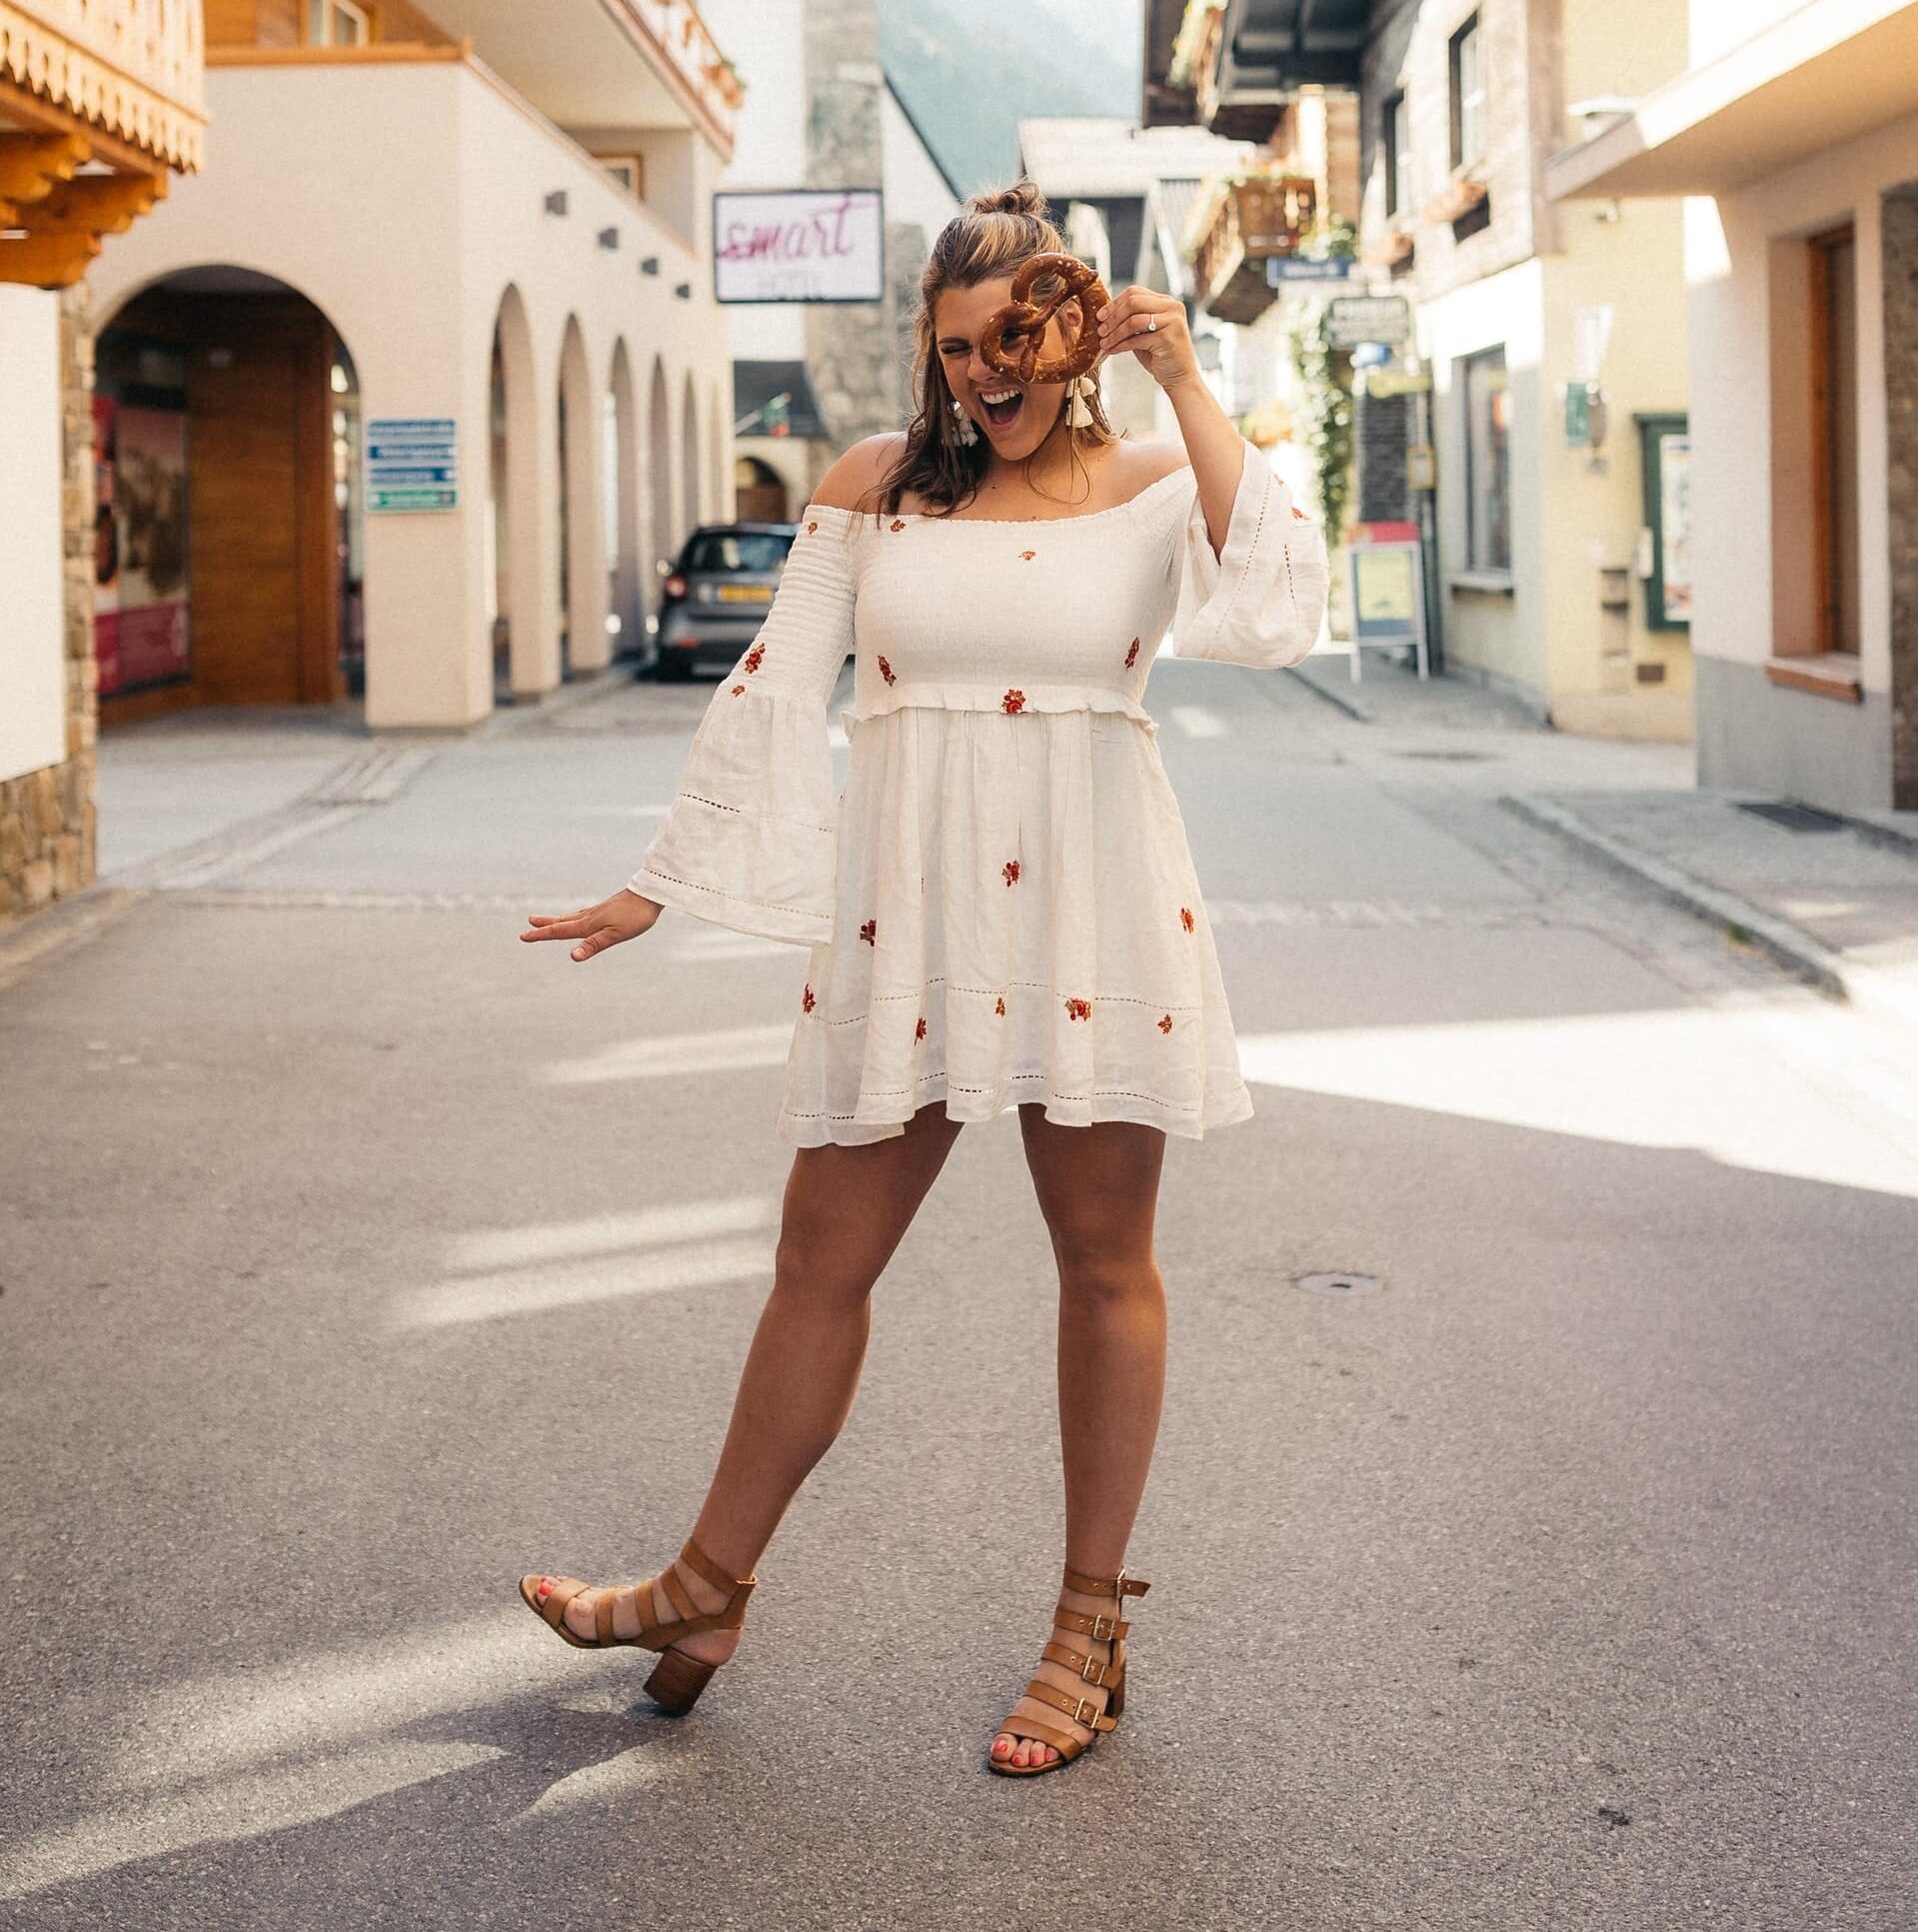 Find an au pair job in Germany and see yourself stading in one of the beautiful villages like this girl in her white dress. Conditions to au pair in Germany